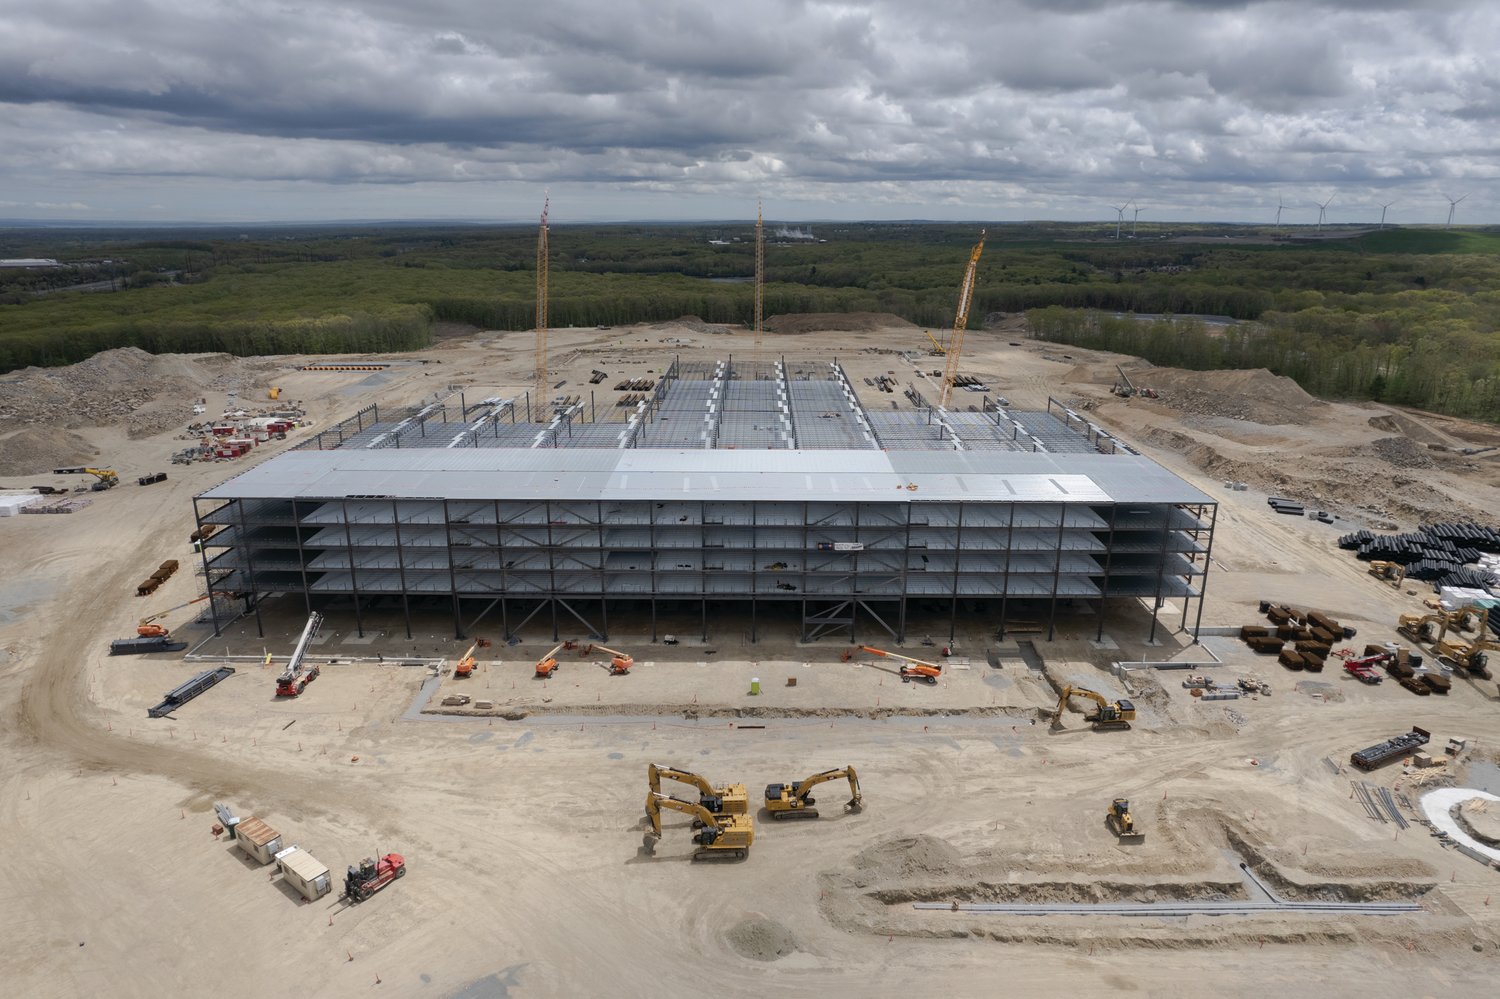 FROM THE AIR: These images of the Amazon construction site in Johnston were captured by drones piloted by Trevor Bryan, an FAA Licensed and insured drone pilot, the owner and operator of New England Aerial Services, on May 15. For more information on the Warwick-based company, visit their Facebook page at www.facebook.com/newenglandaerialservices.